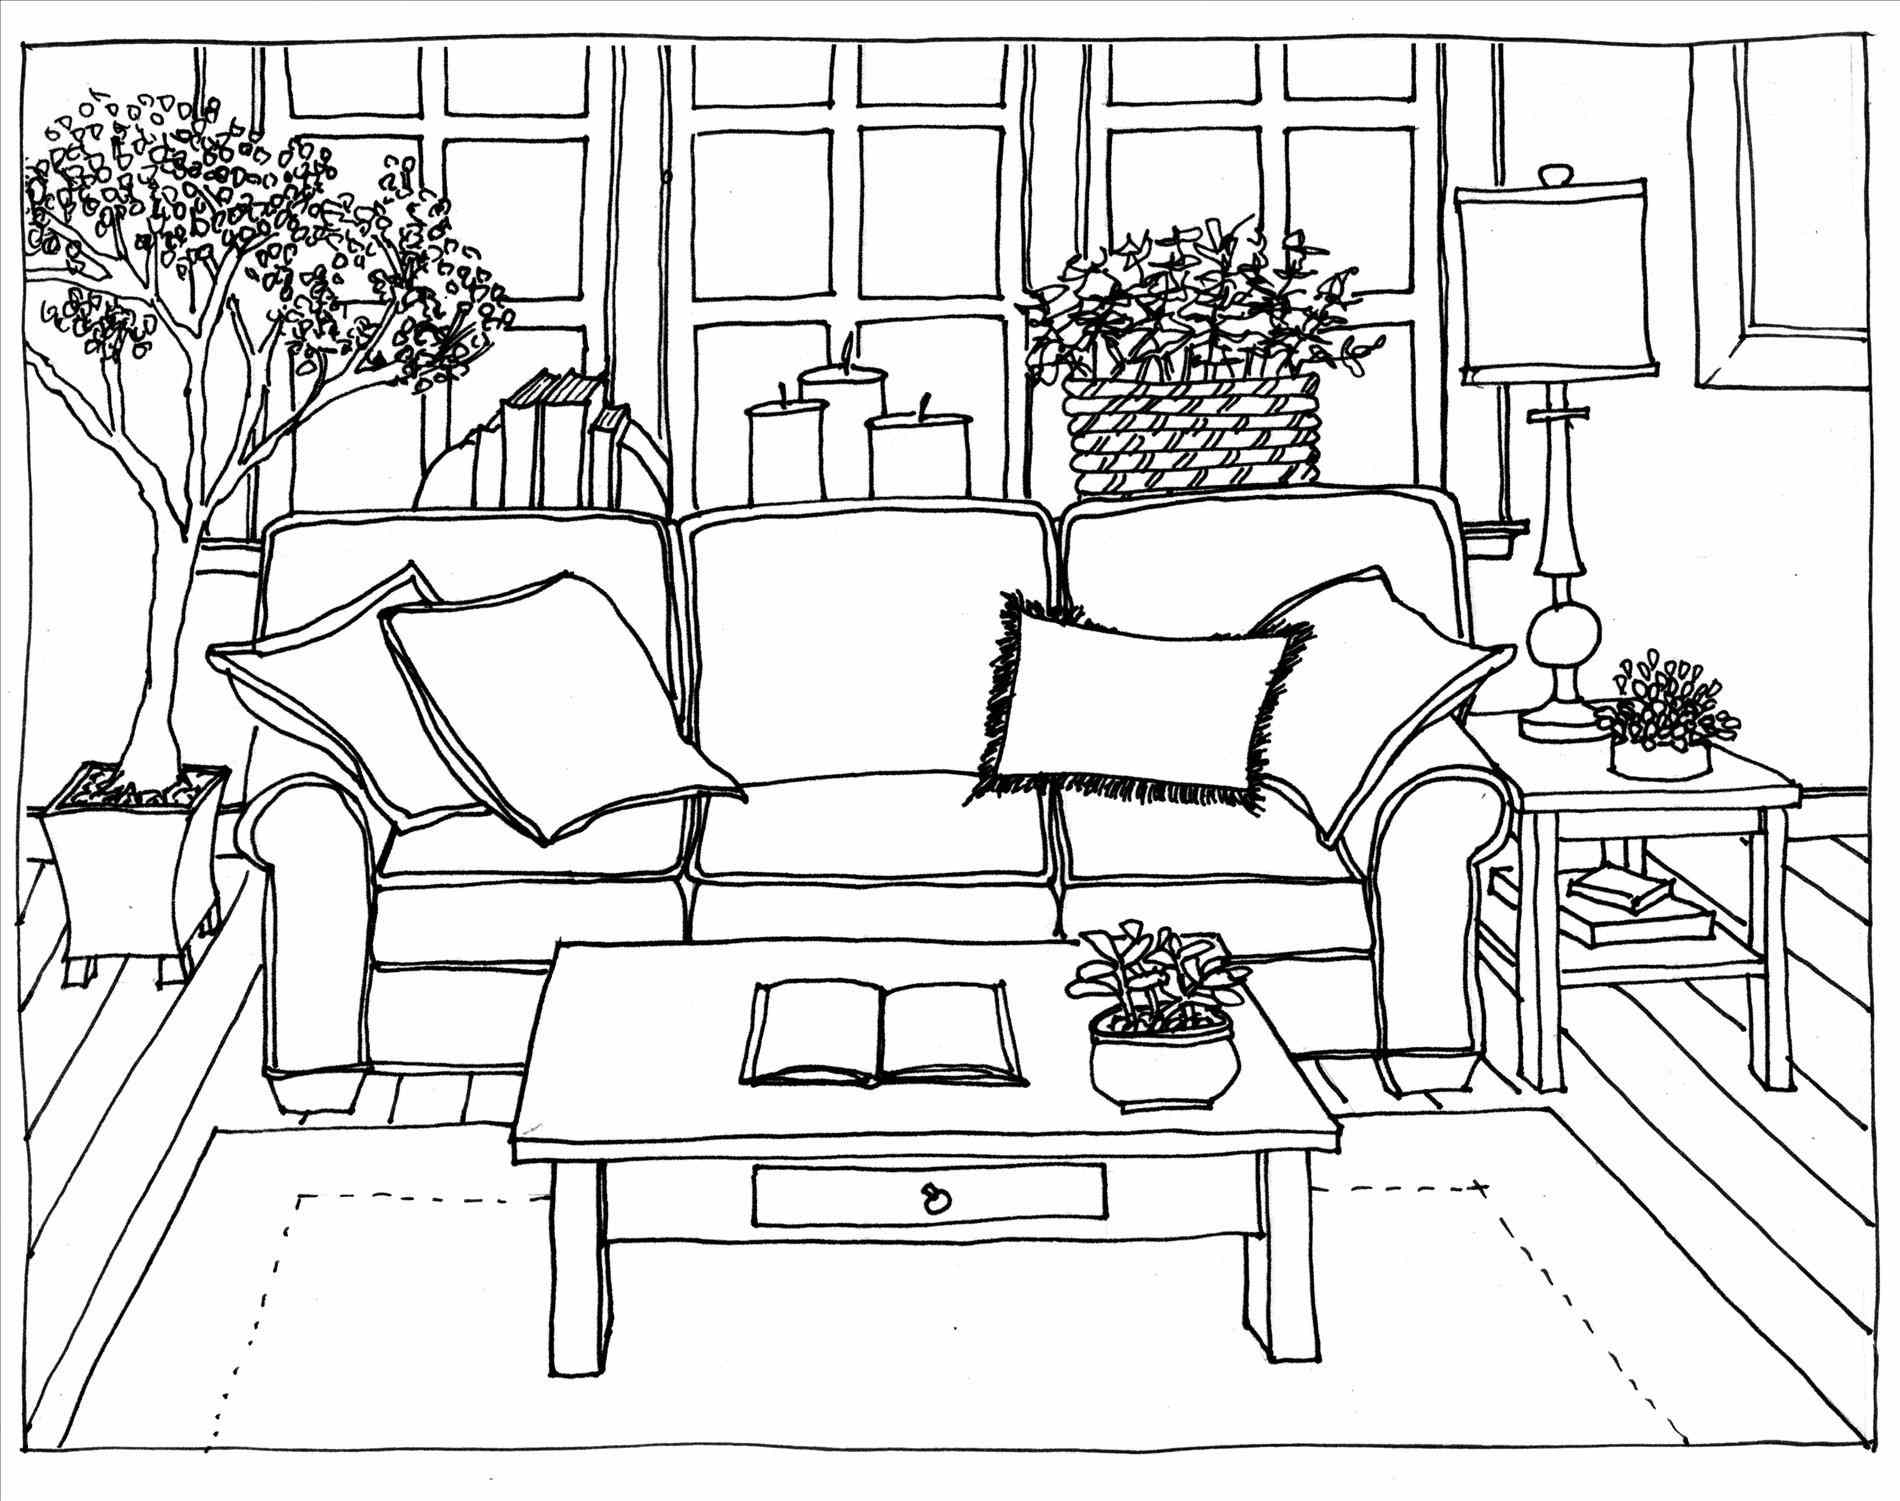 Draw A Plan Of Your Living Room